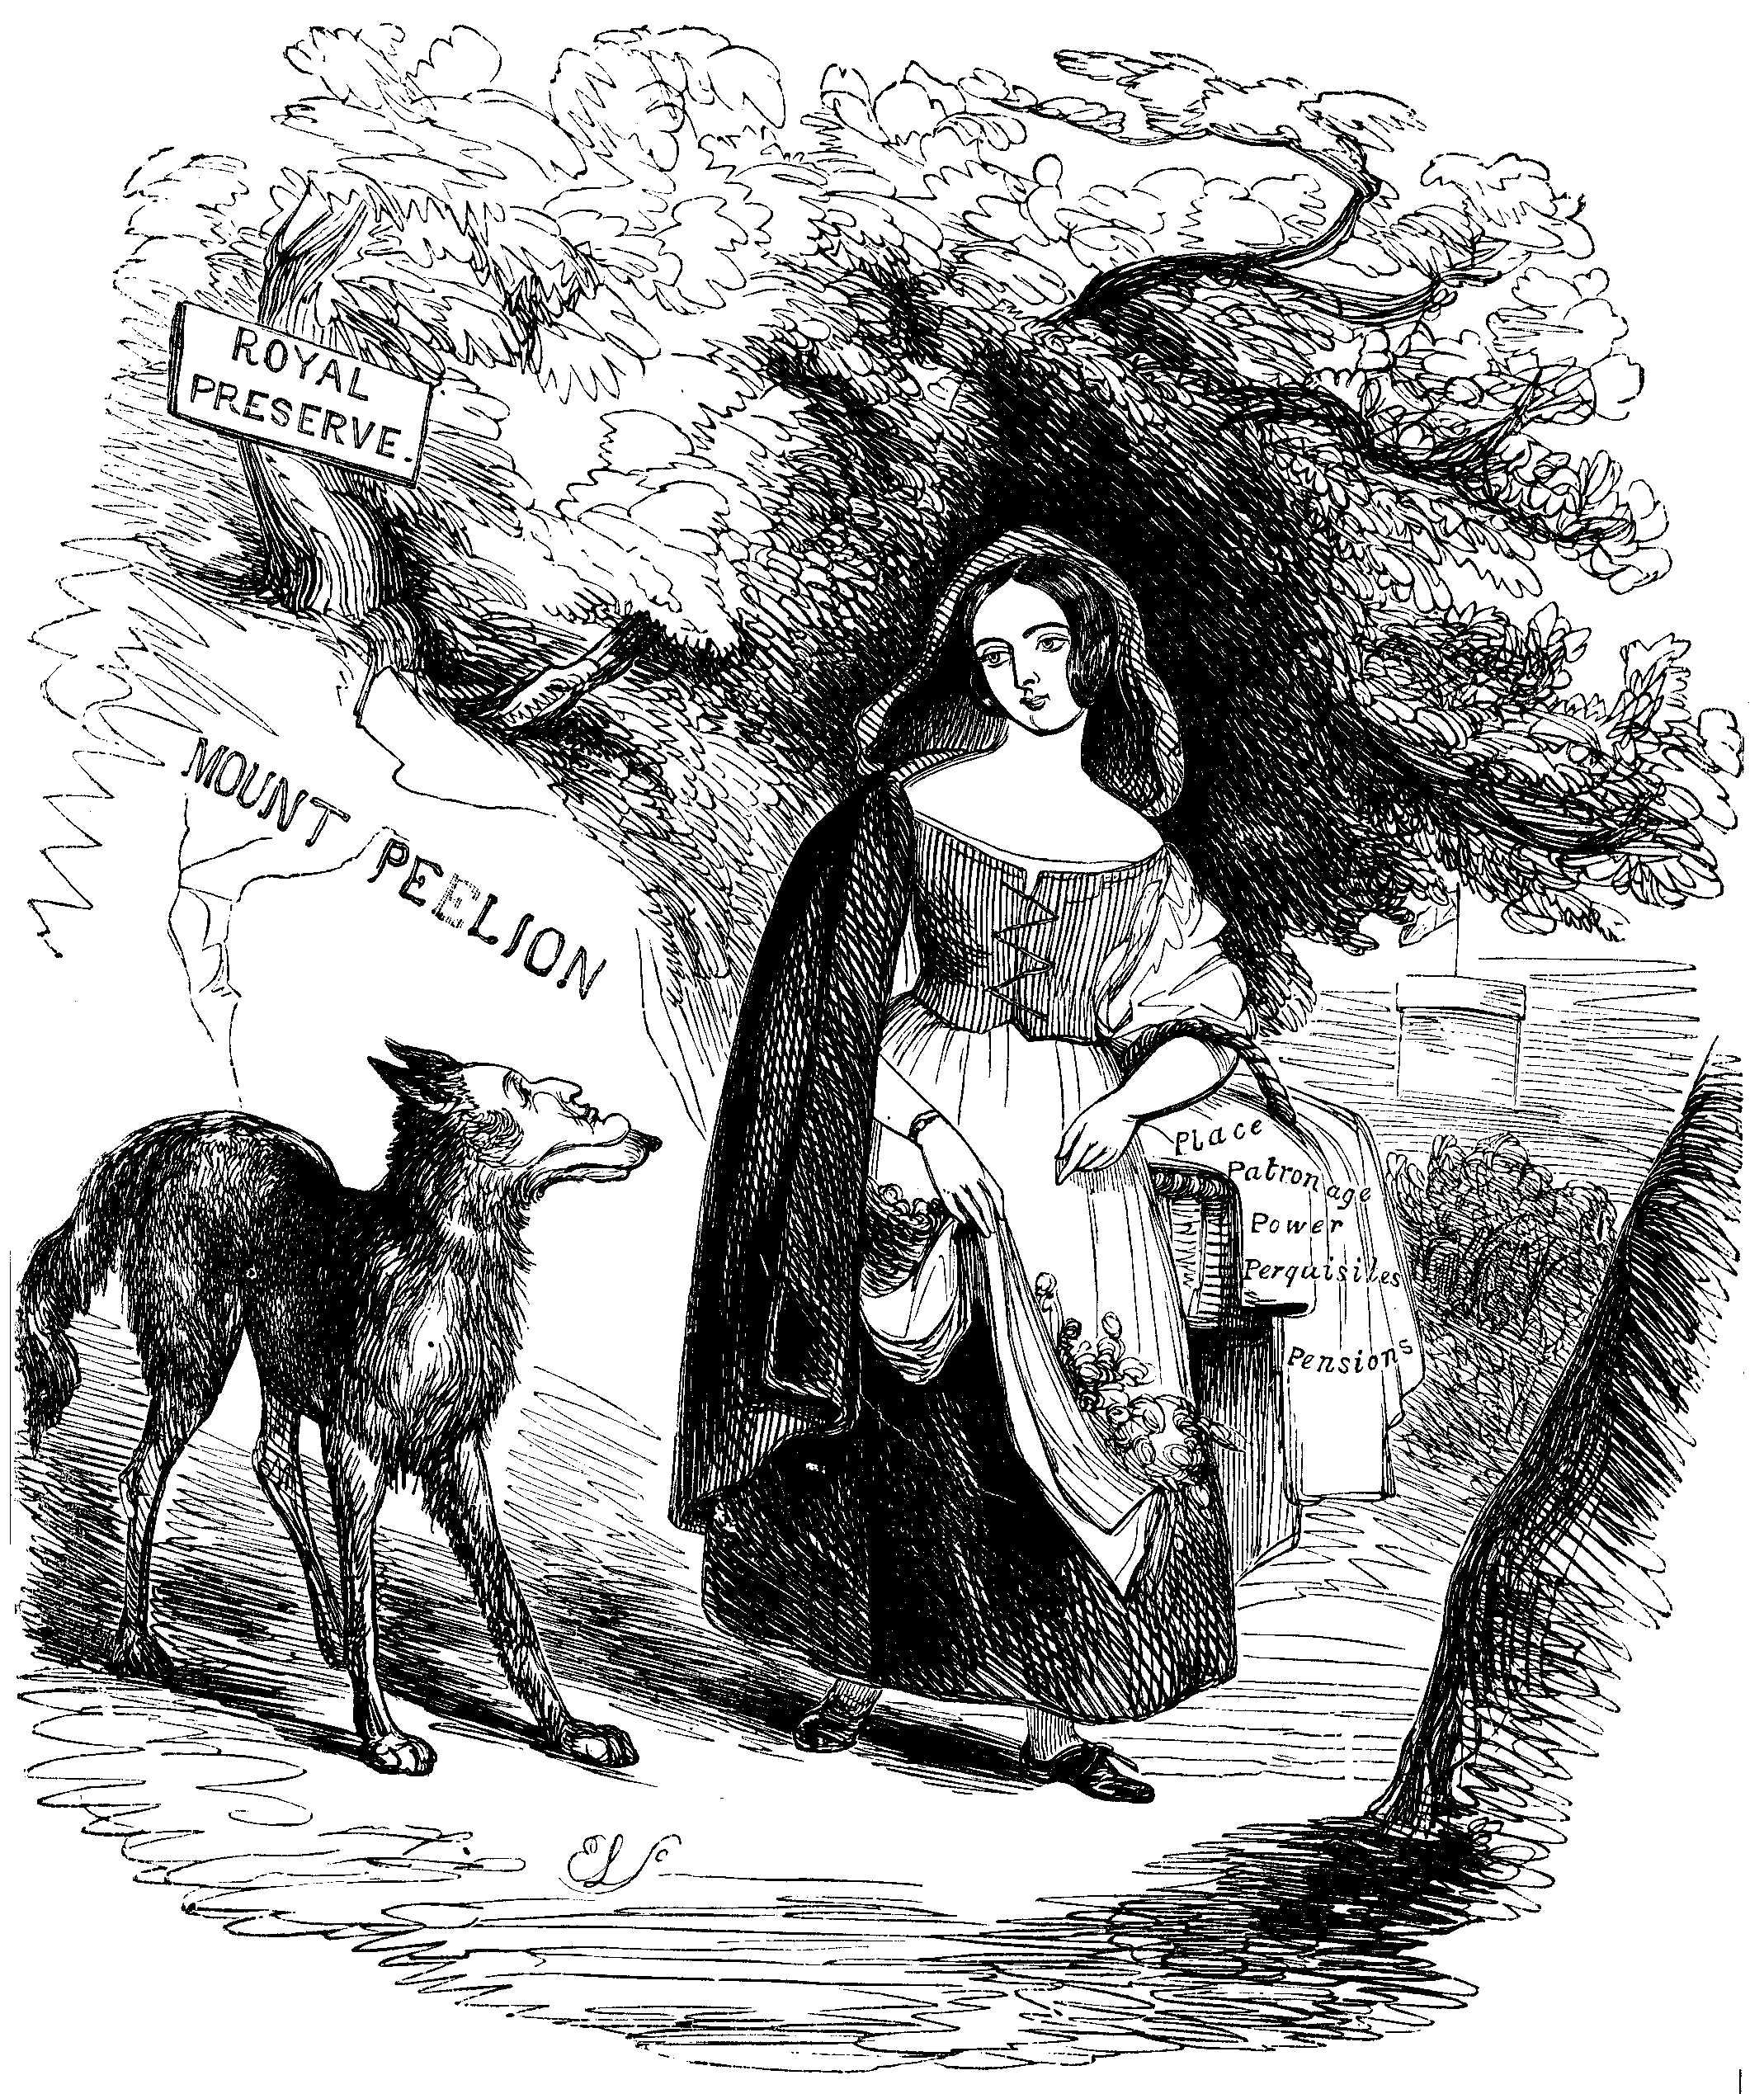 Red Riding Hood (the Queen) faces a wolf (Peel) in the Royal Preserve of Mount Peelion.